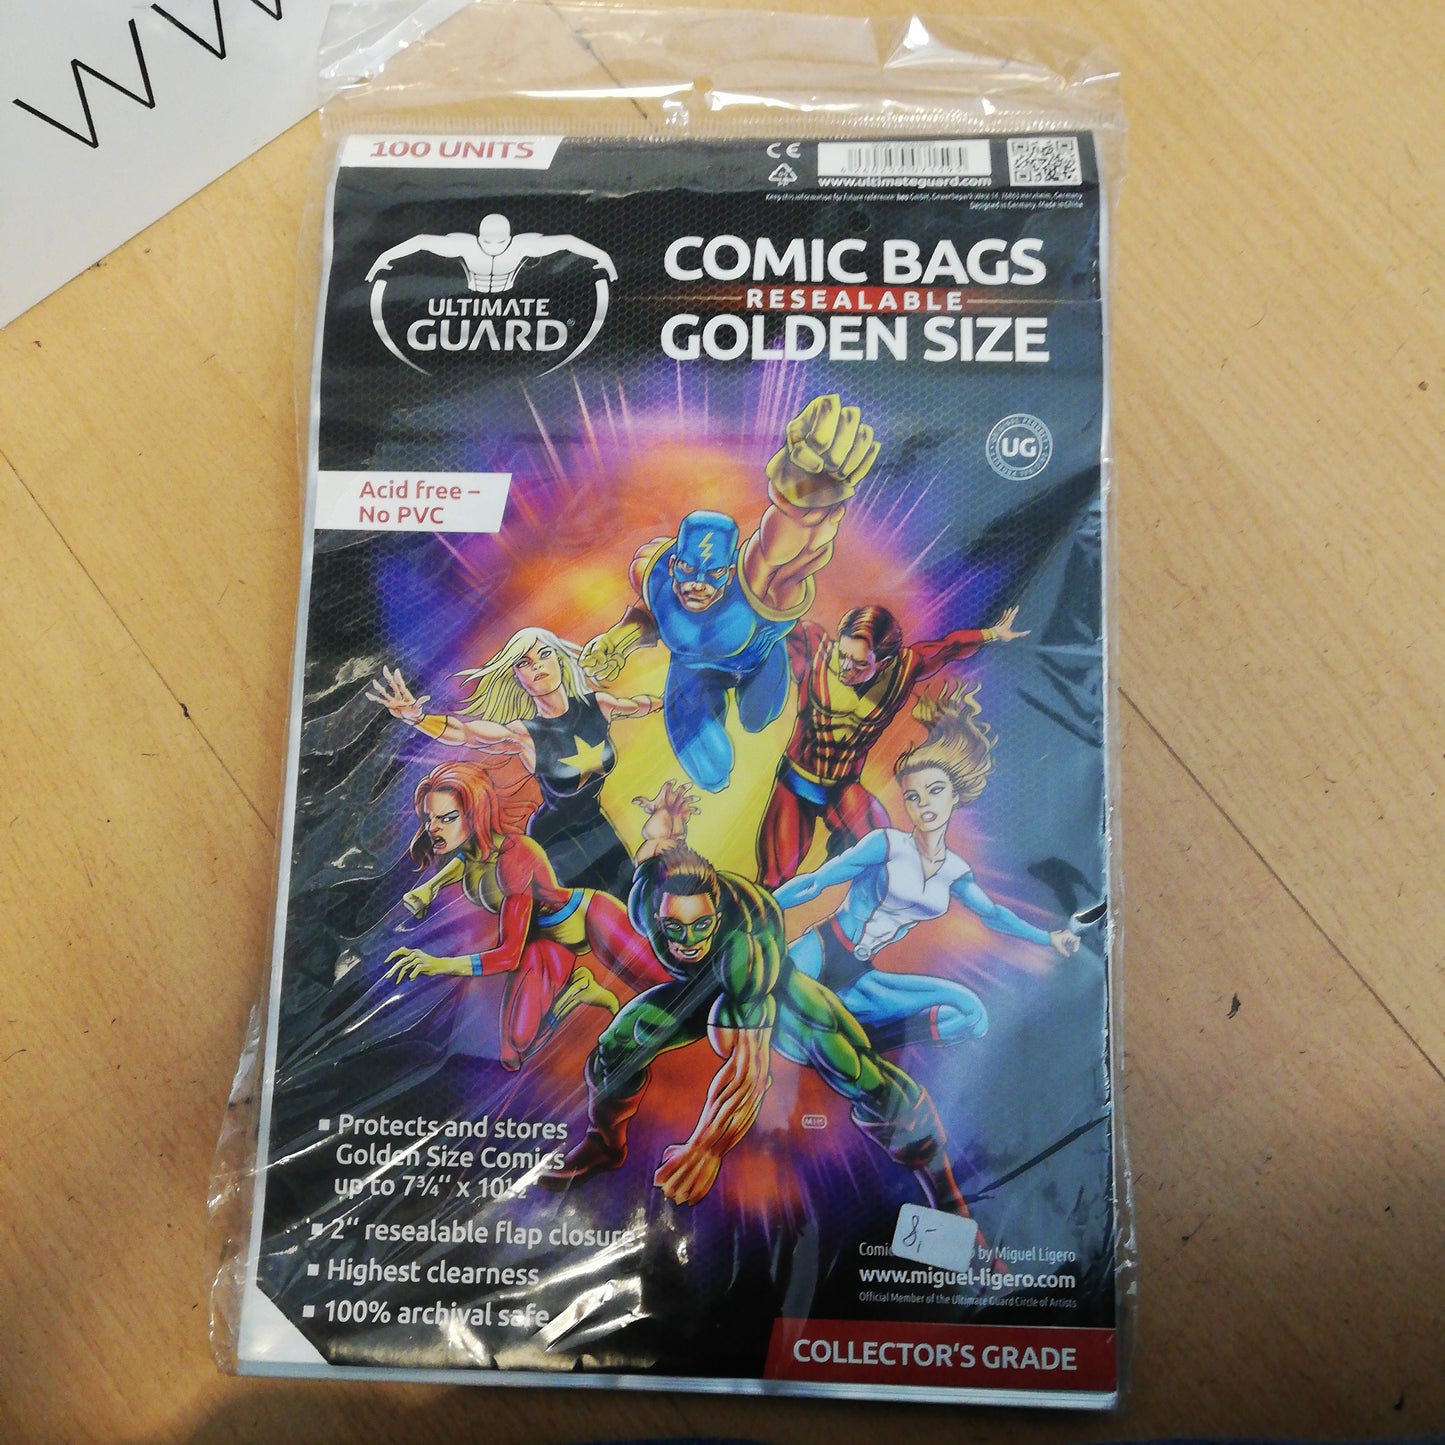 Ultimate Guars Comic Bags Golden size 100 units